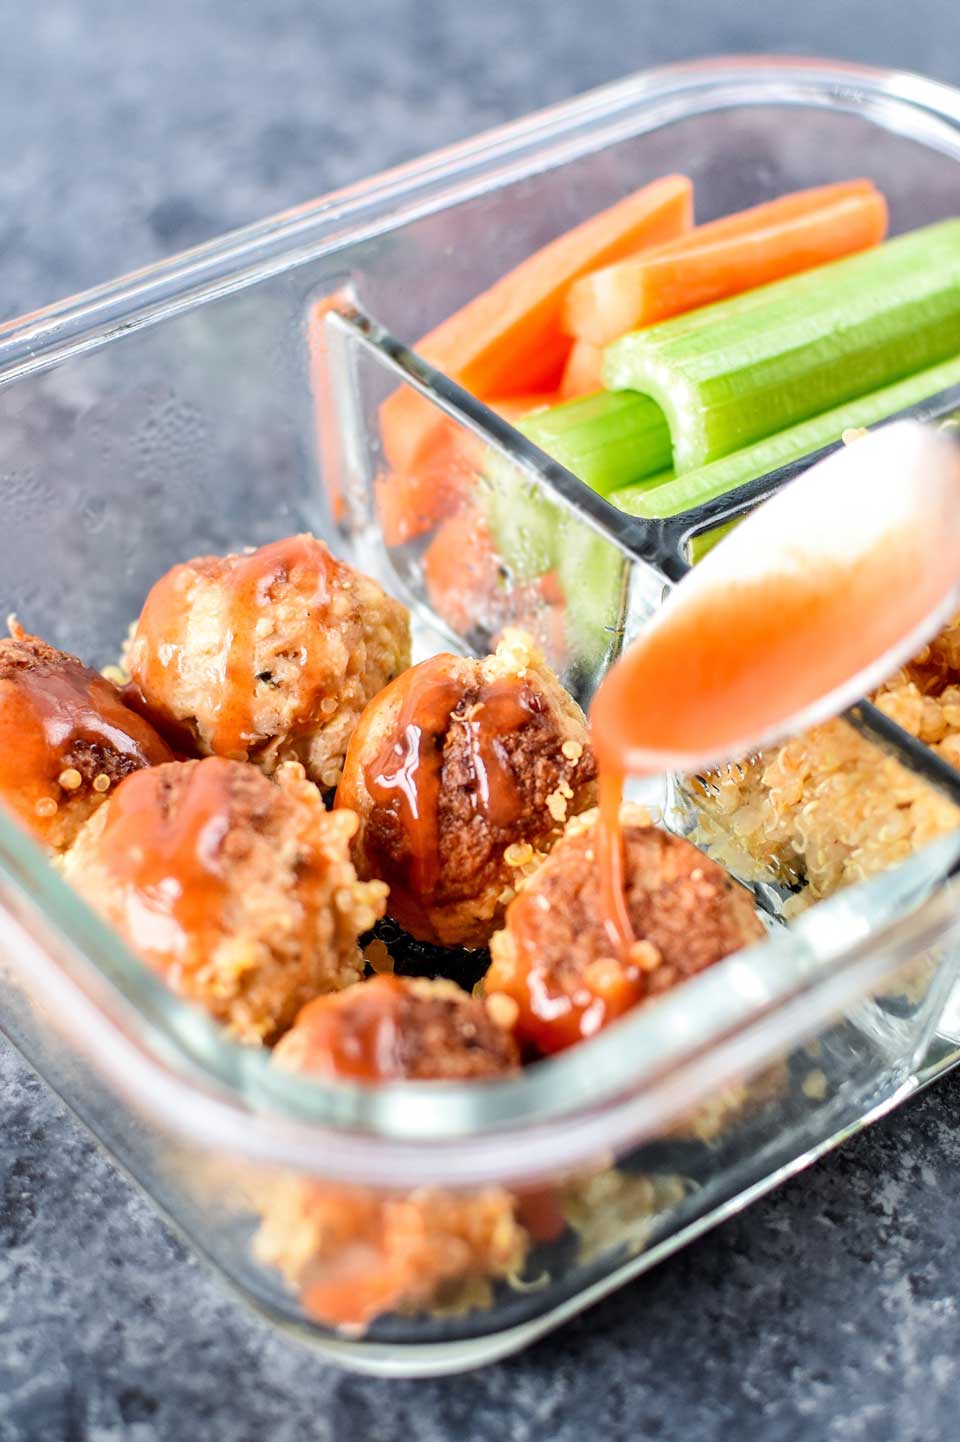 Get a jump on healthy eating this week – make this recipe for Instant Pot Buffalo Chicken Meatballs Meal Prep from Danielle at Project Meal Plan! And then plan out some easy chicken dinner recipes from our pressure cooker list, too! Mmmmmm … sounds like a yummy week ahead!